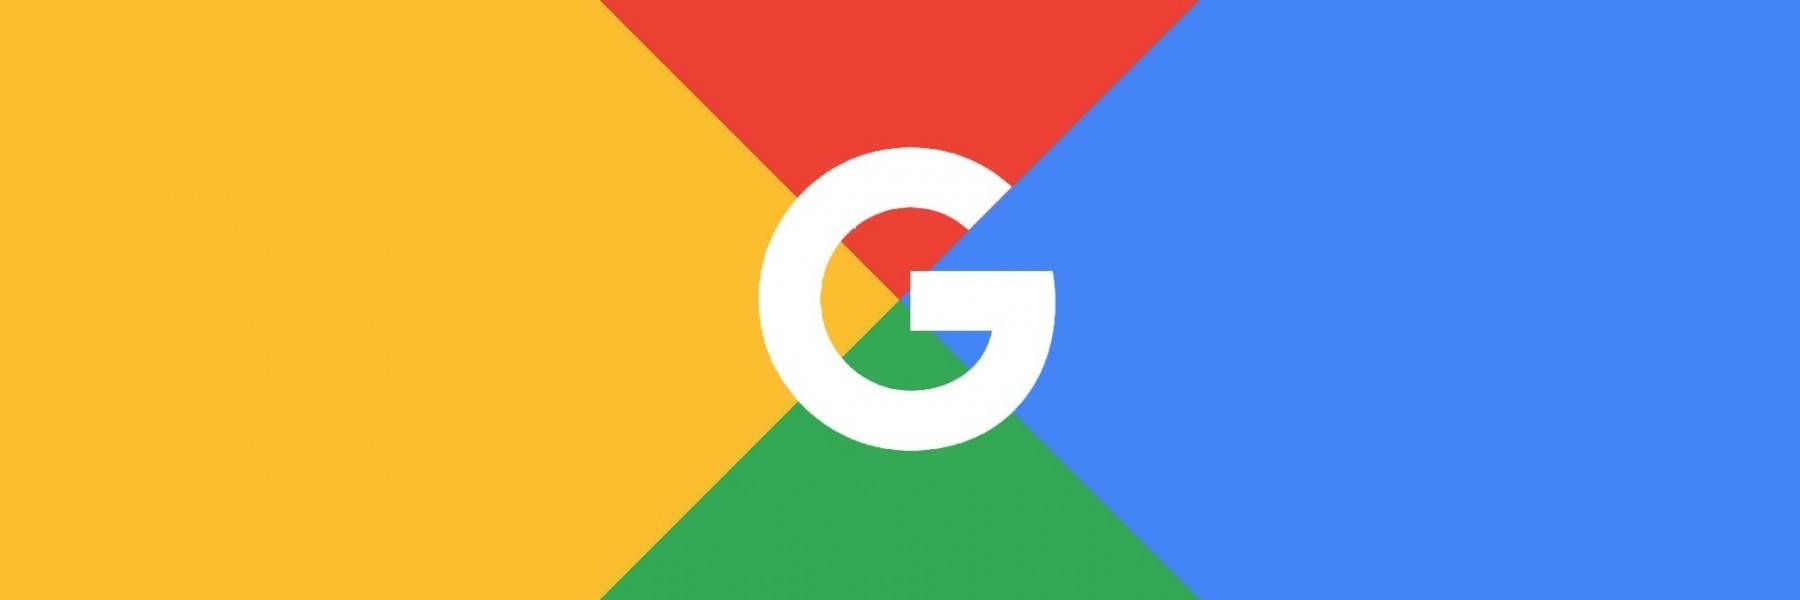 Google's white logo on red, yellow, green and blue background blocks